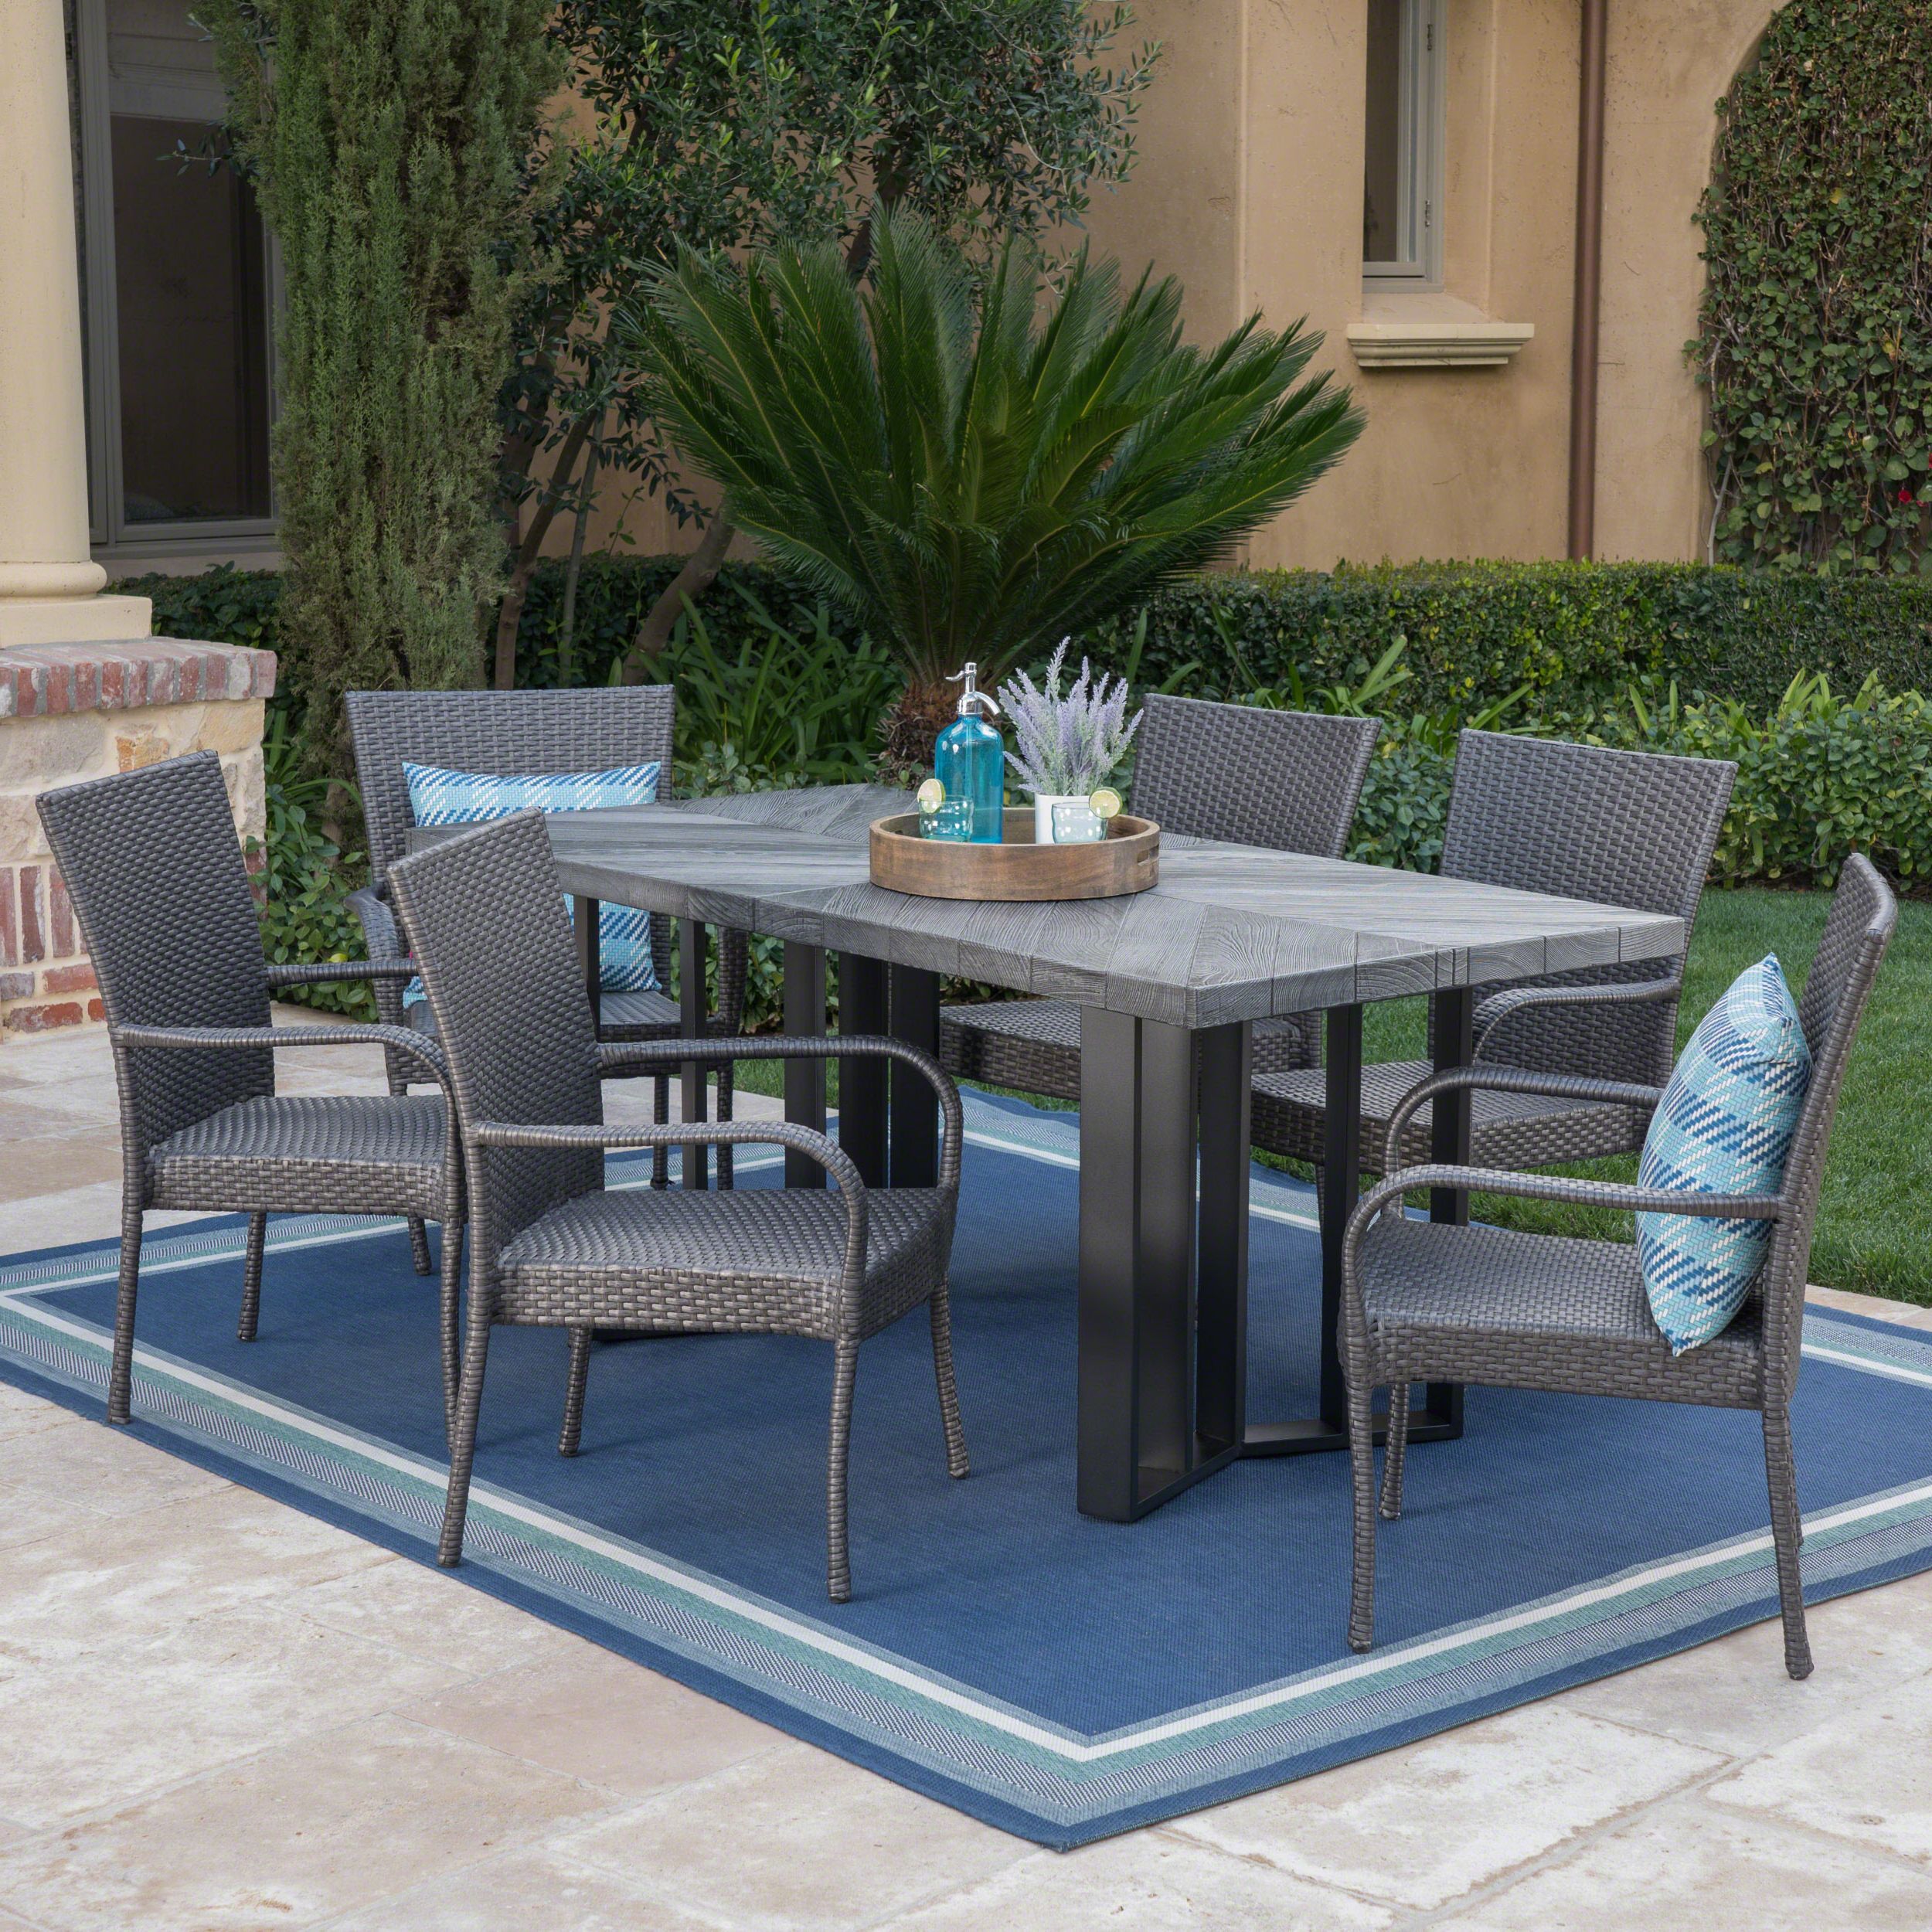 Fabiana Outdoor 7 Piece Wicker Dining Set With Textured Finish Light With Regard To Famous Gray Wicker Rectangular Patio Dining Sets (View 2 of 15)